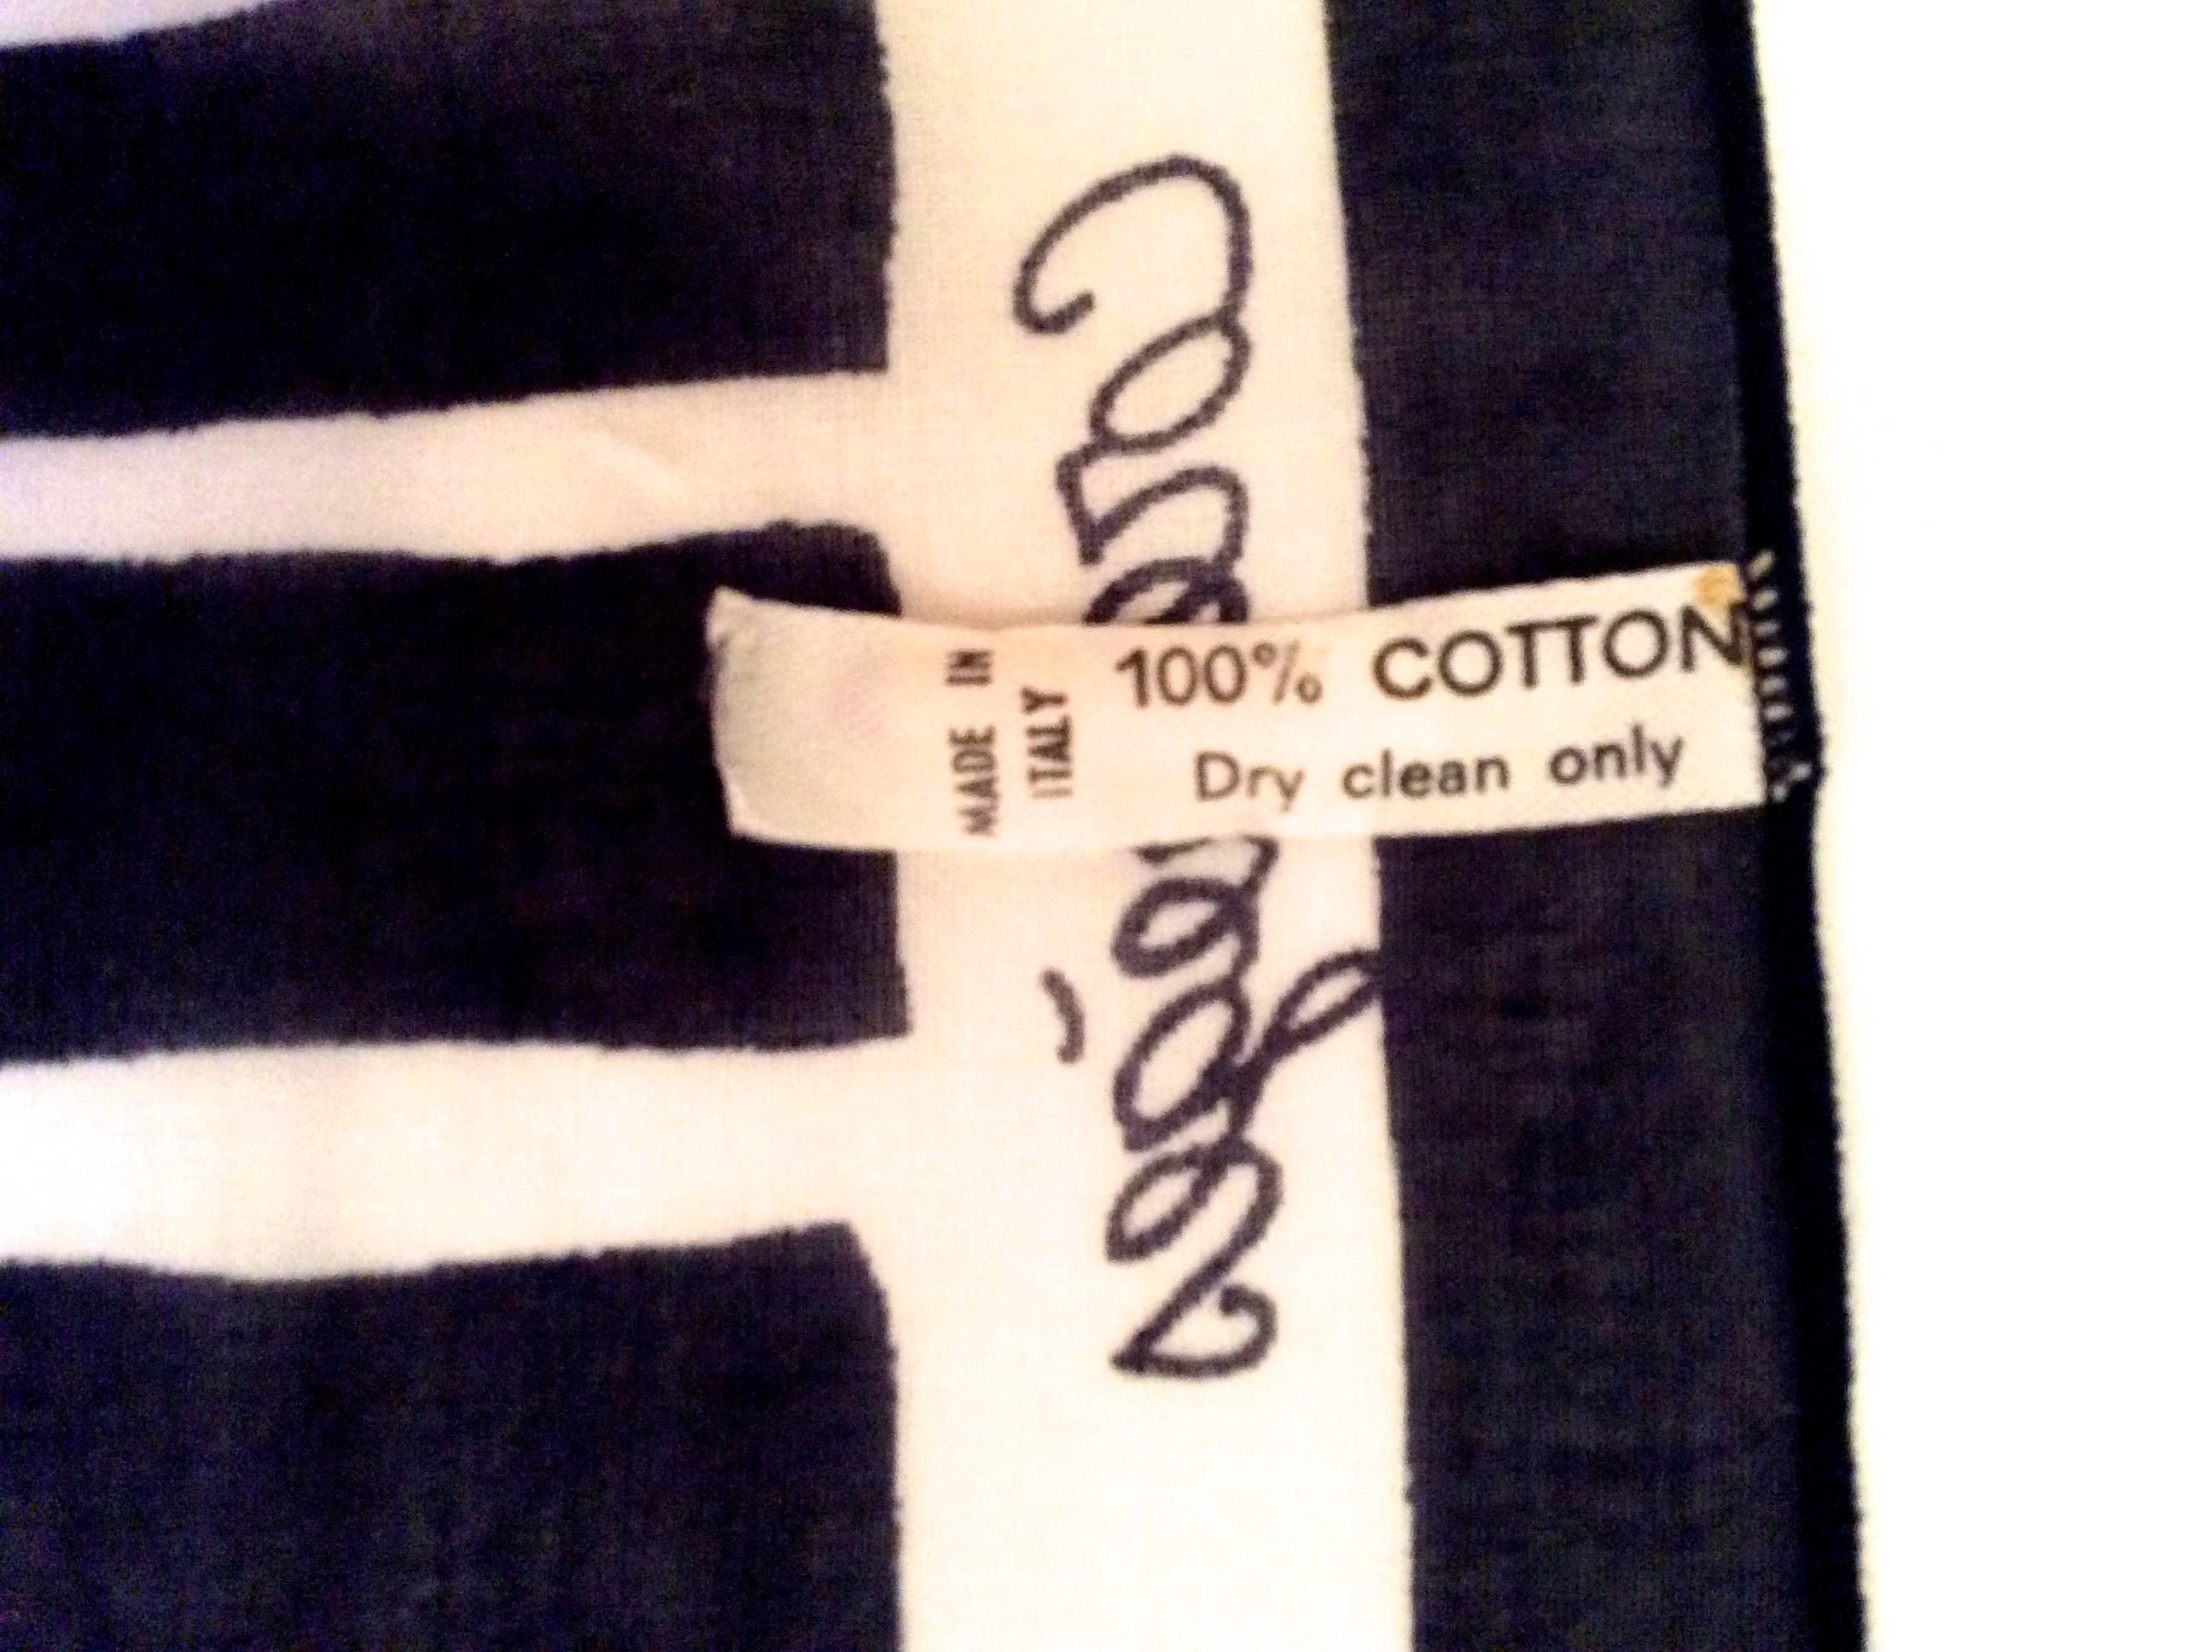 Presented here is a beautiful cotton scarf from Courreges. The scarf is a series of blue stripes against a solid white background with a navy blue and white border around the scarf. Embedded inside the white portion of the border is the name